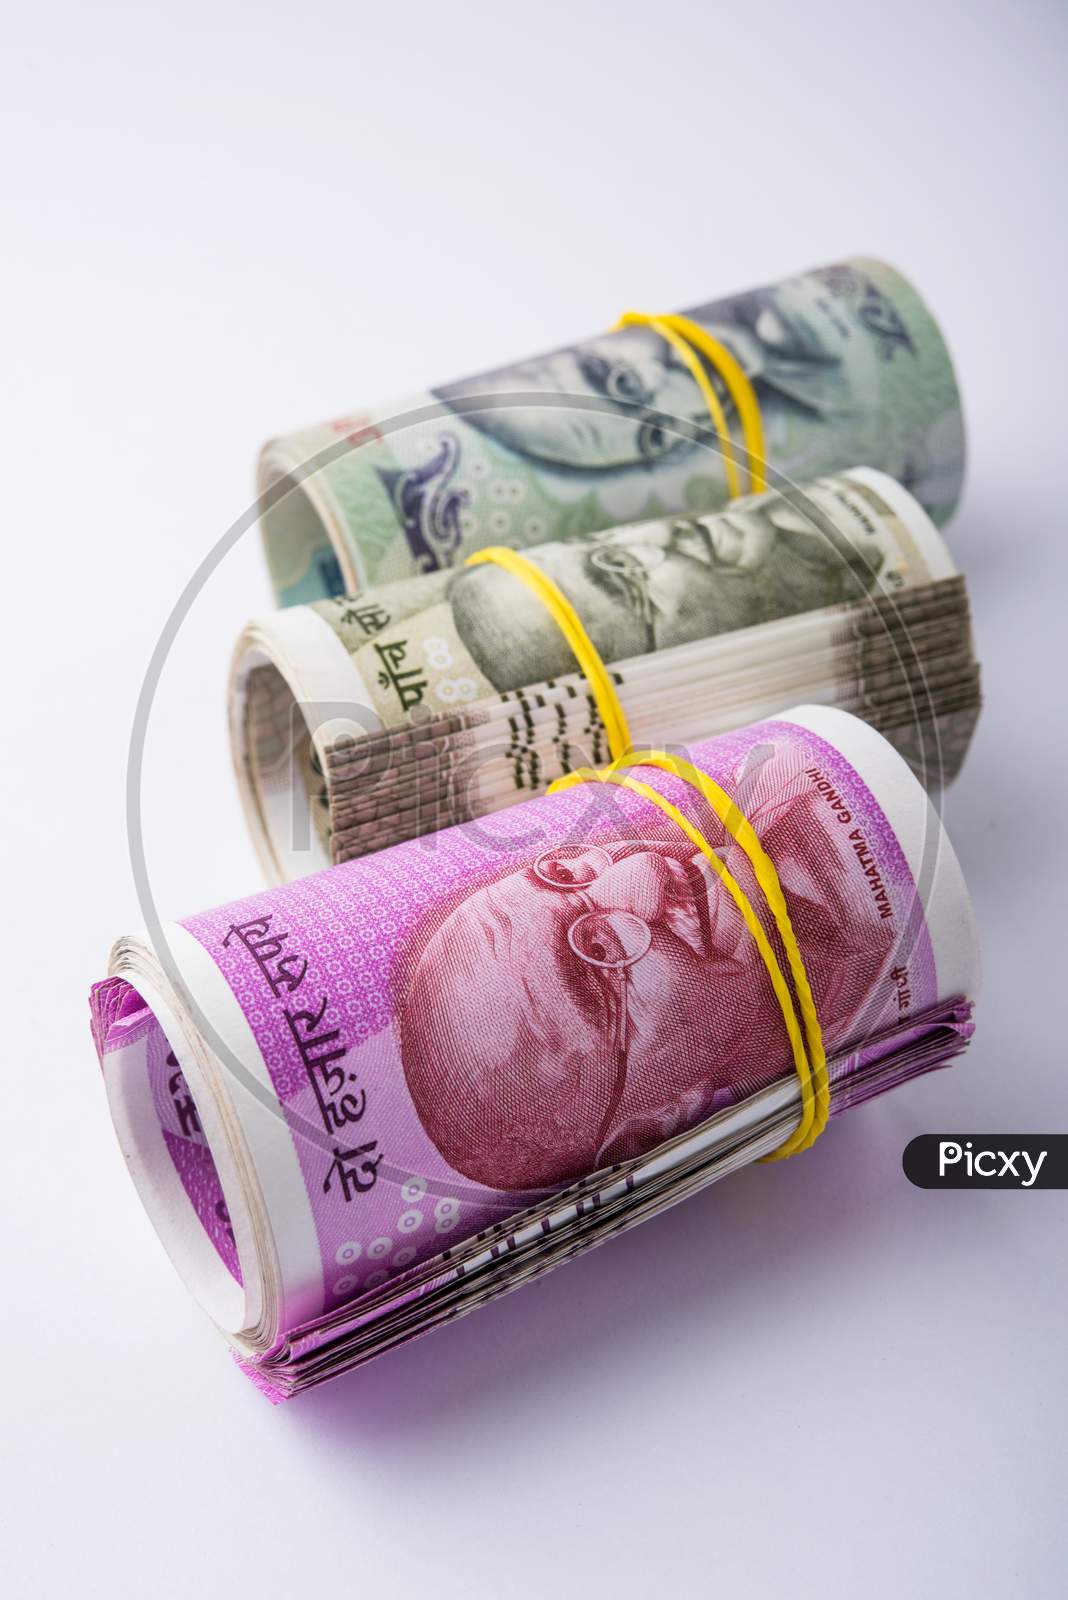 Indian Rupees Roll or Bundle